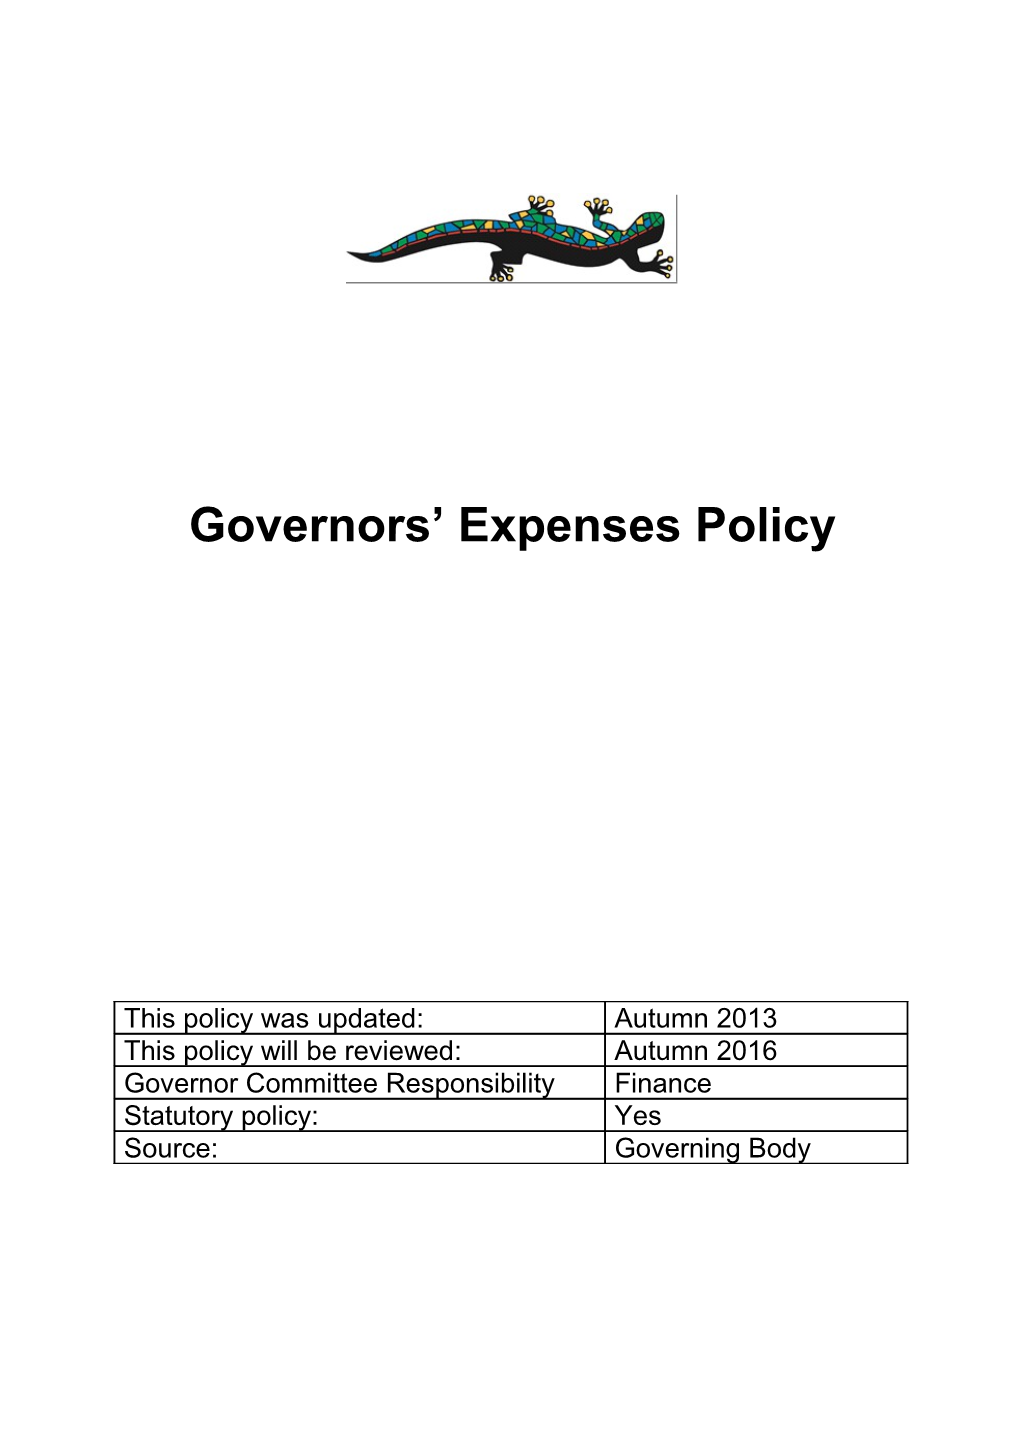 Hampton Wick Infant and Nursery School Governors Allowances Policy